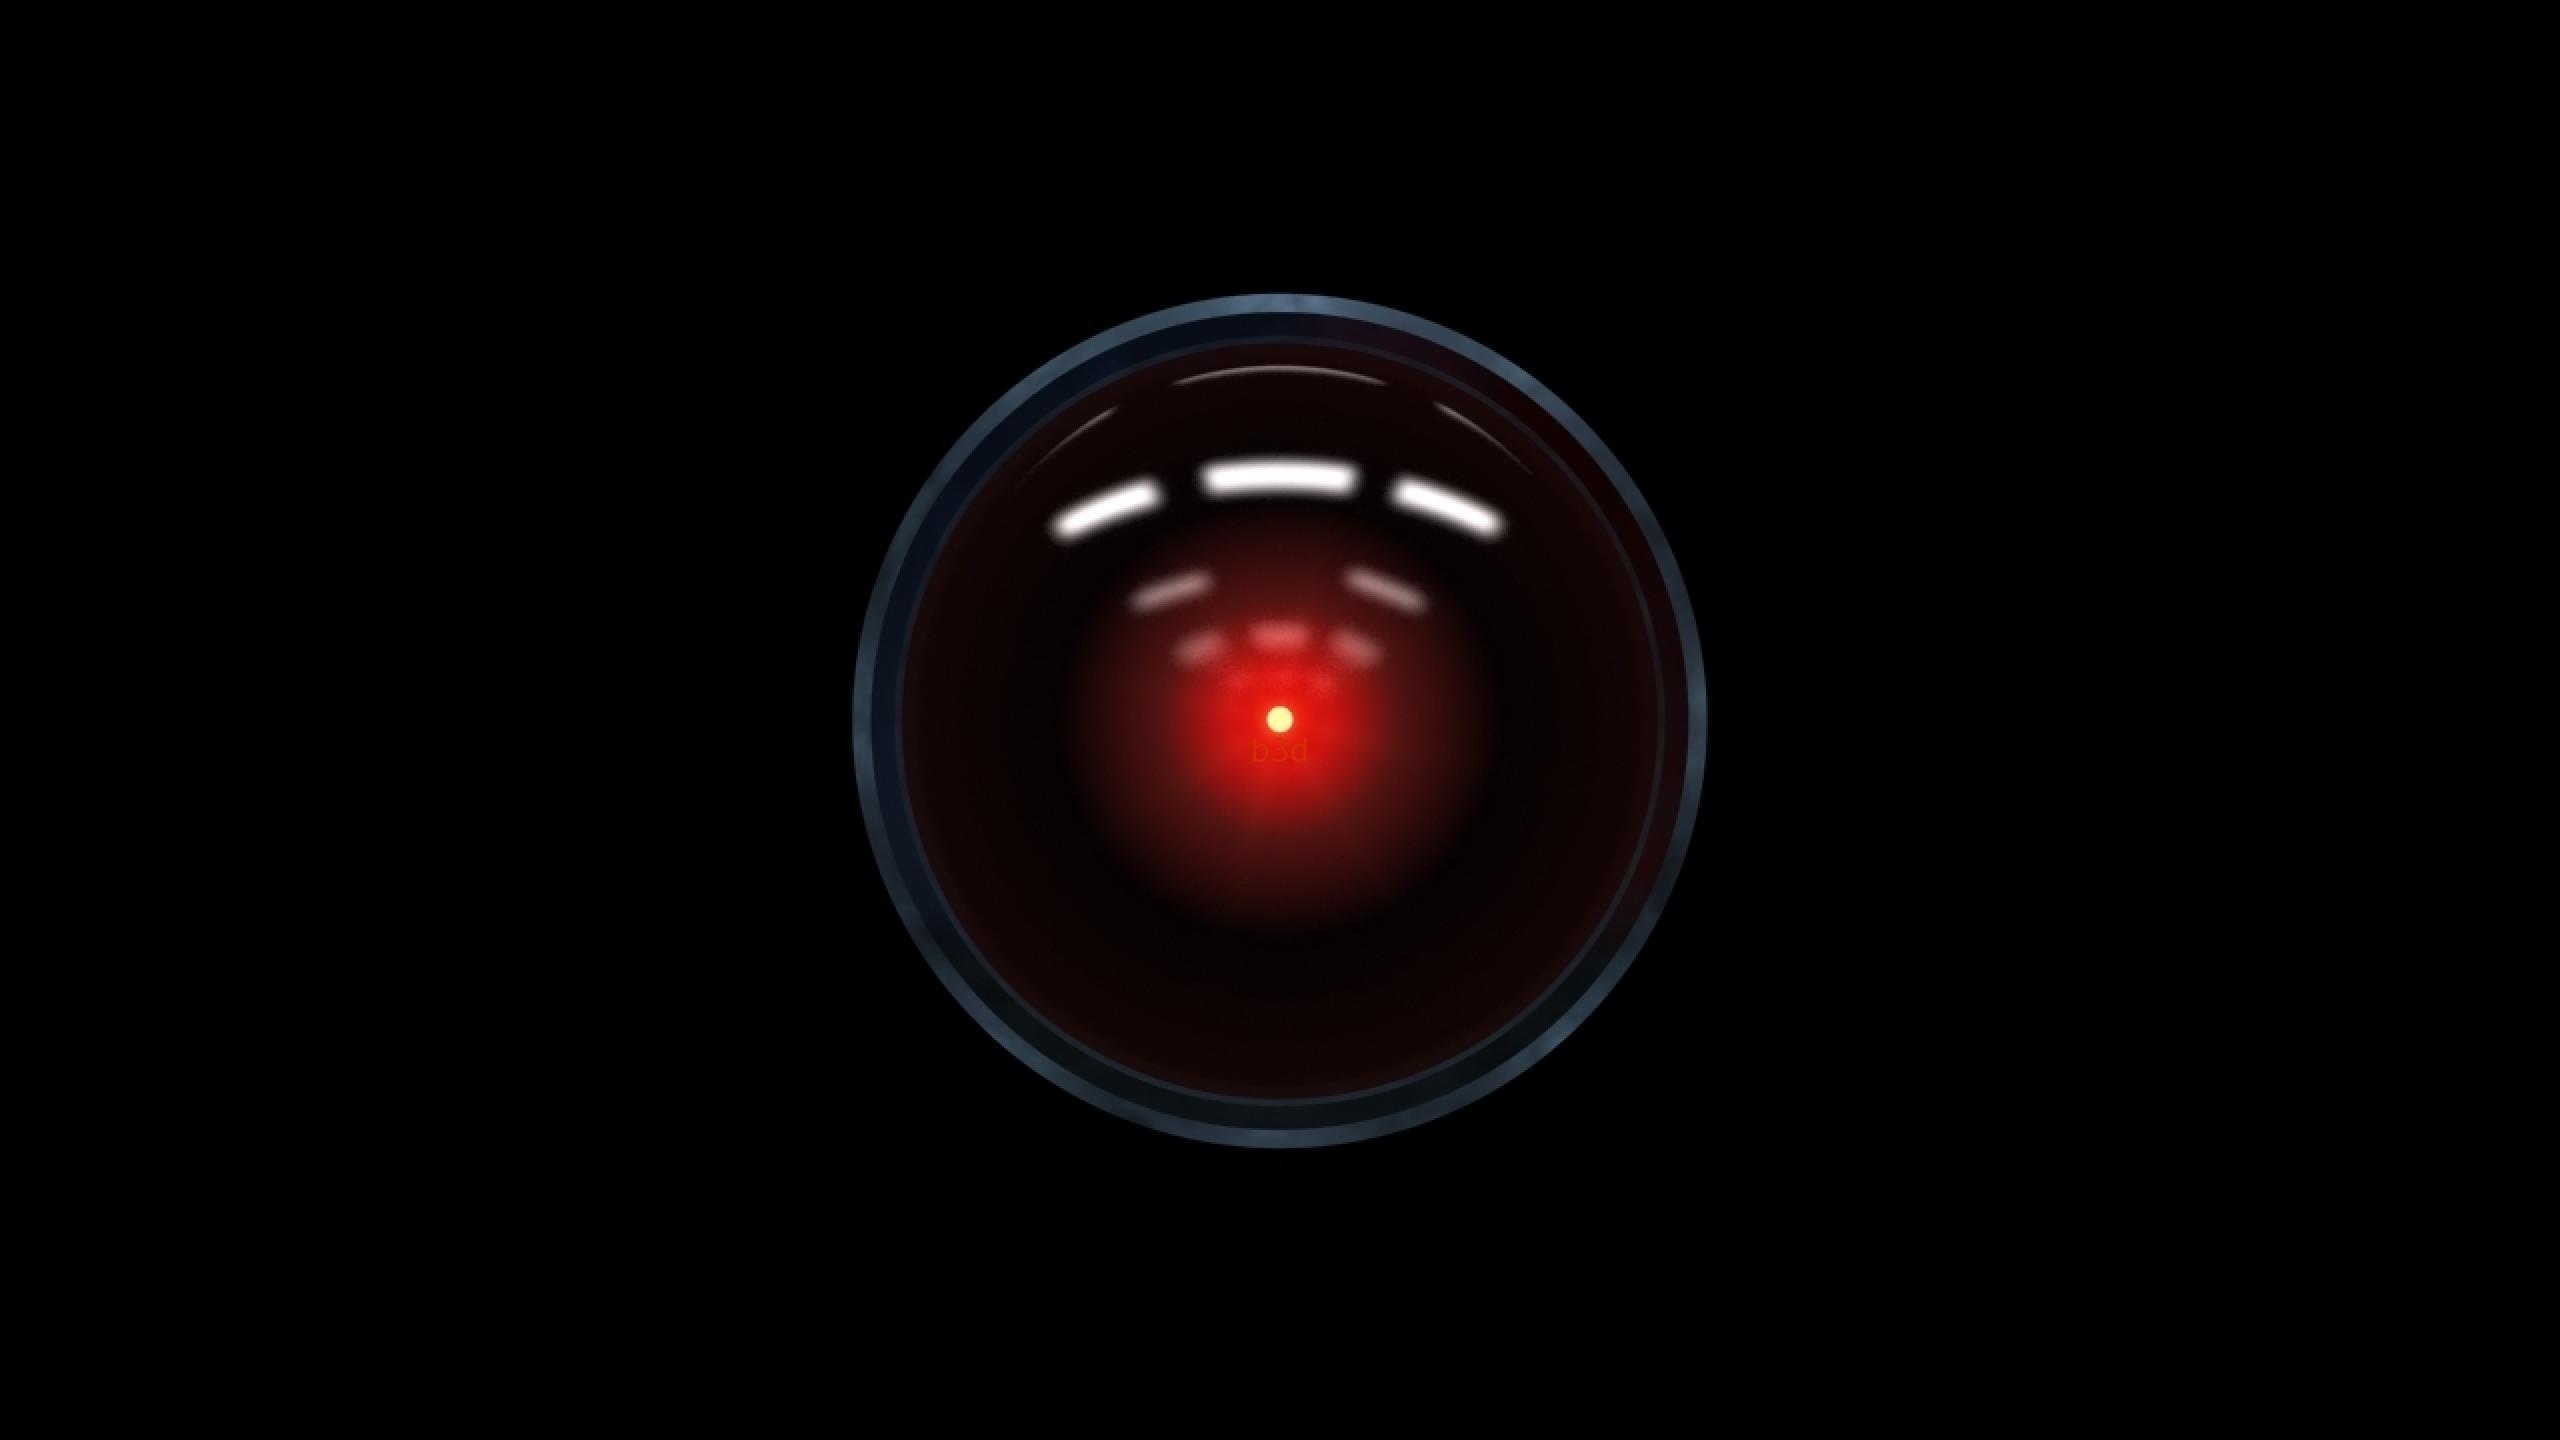 2001 a space odessey hal 9000 replica